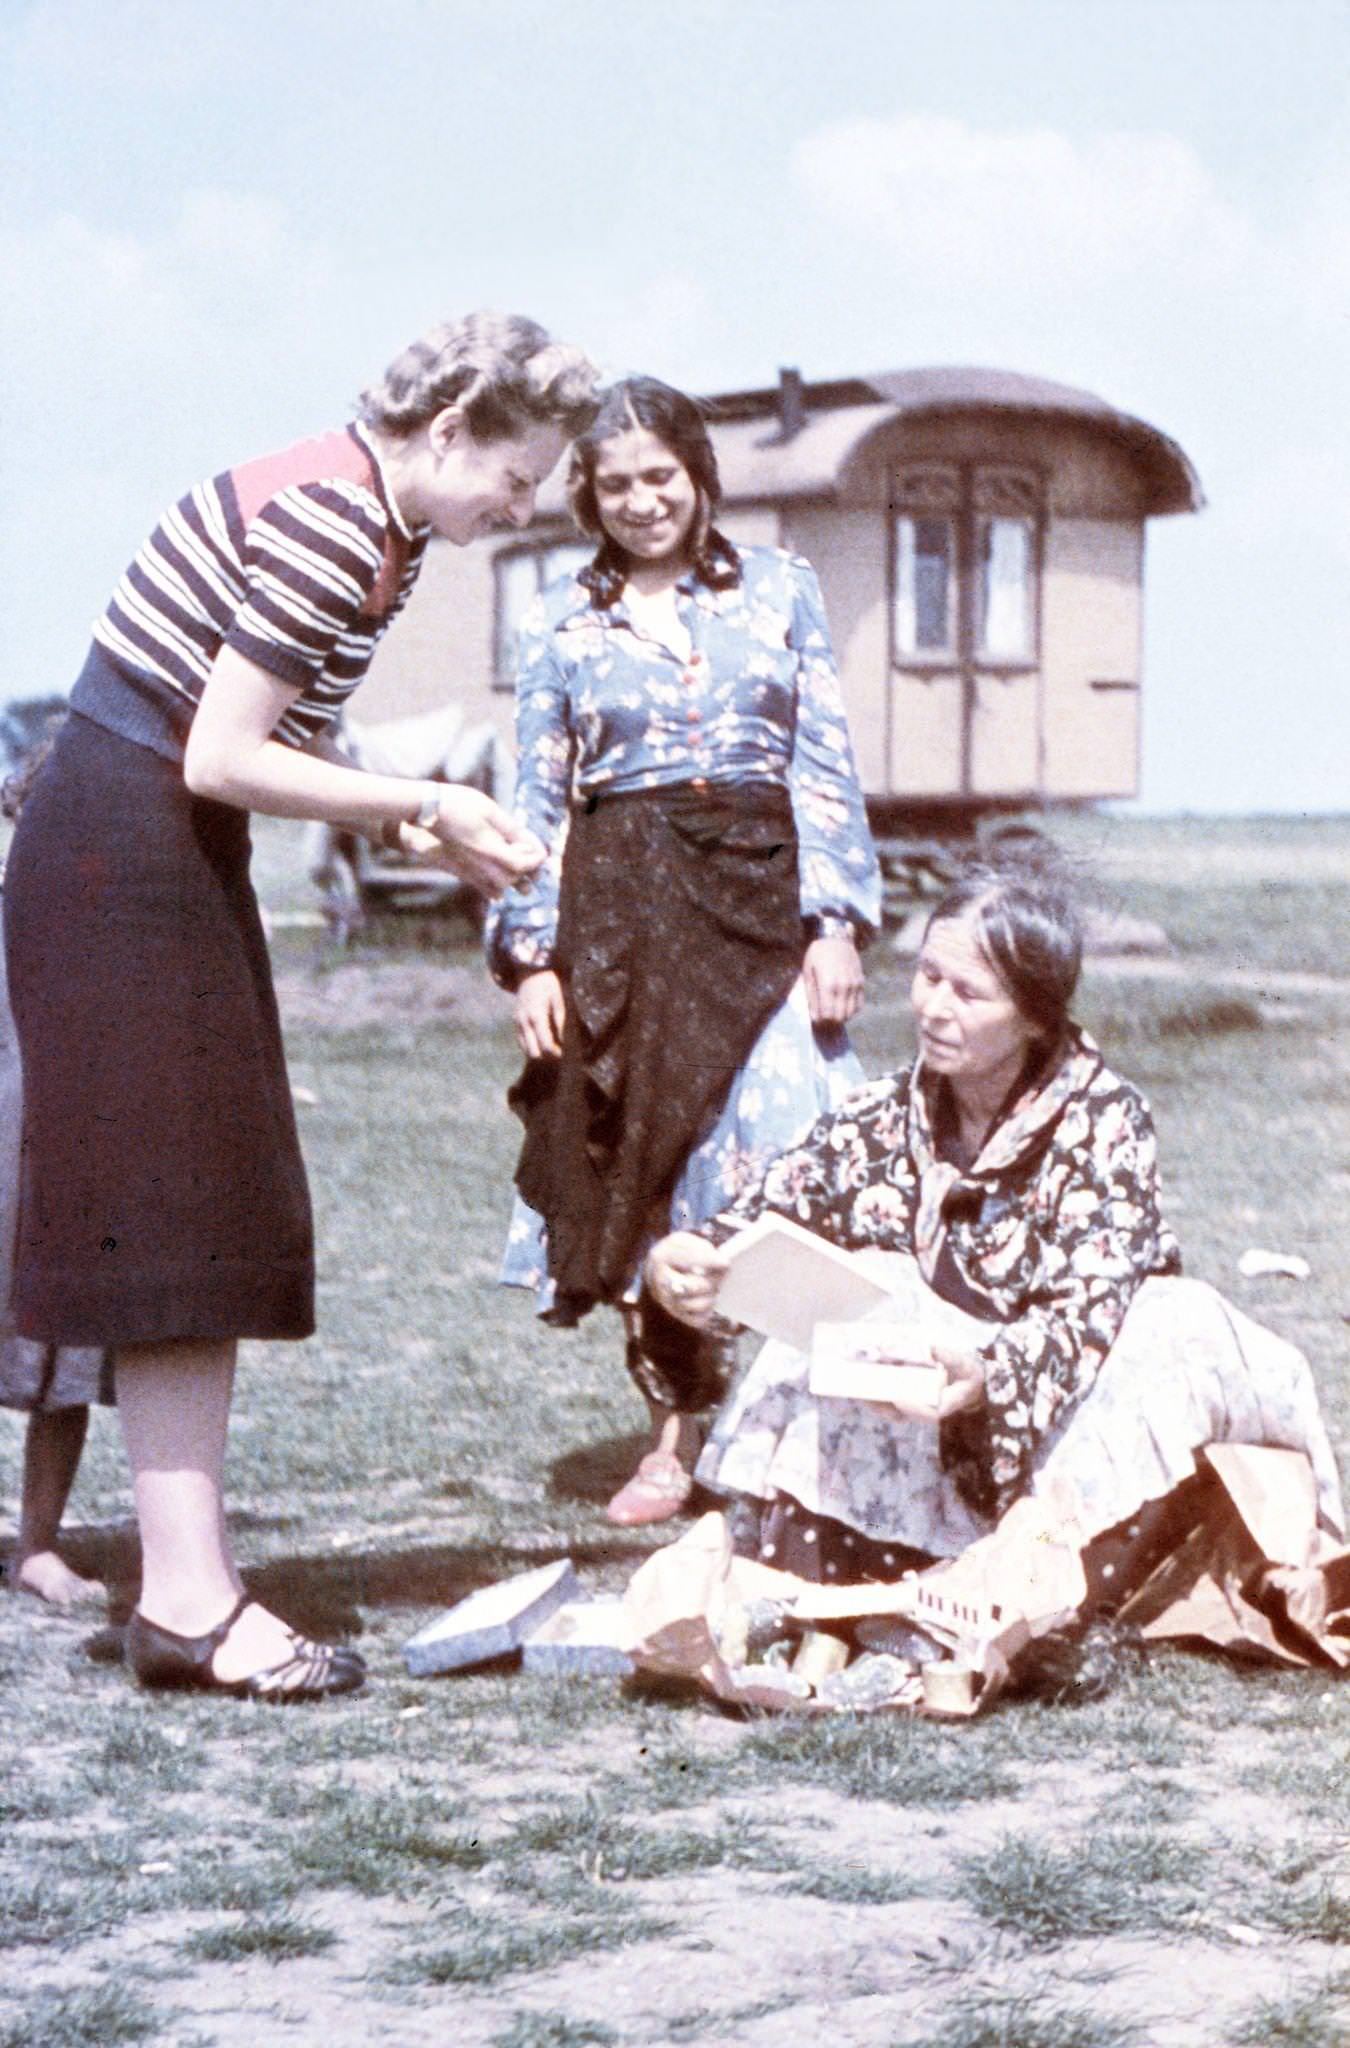 Sophie Ehrhardt of the Racial Hygiene Research Center conducting an interview with an old woman during the Gypsy (Sinti and Roma) deportation in 1938.